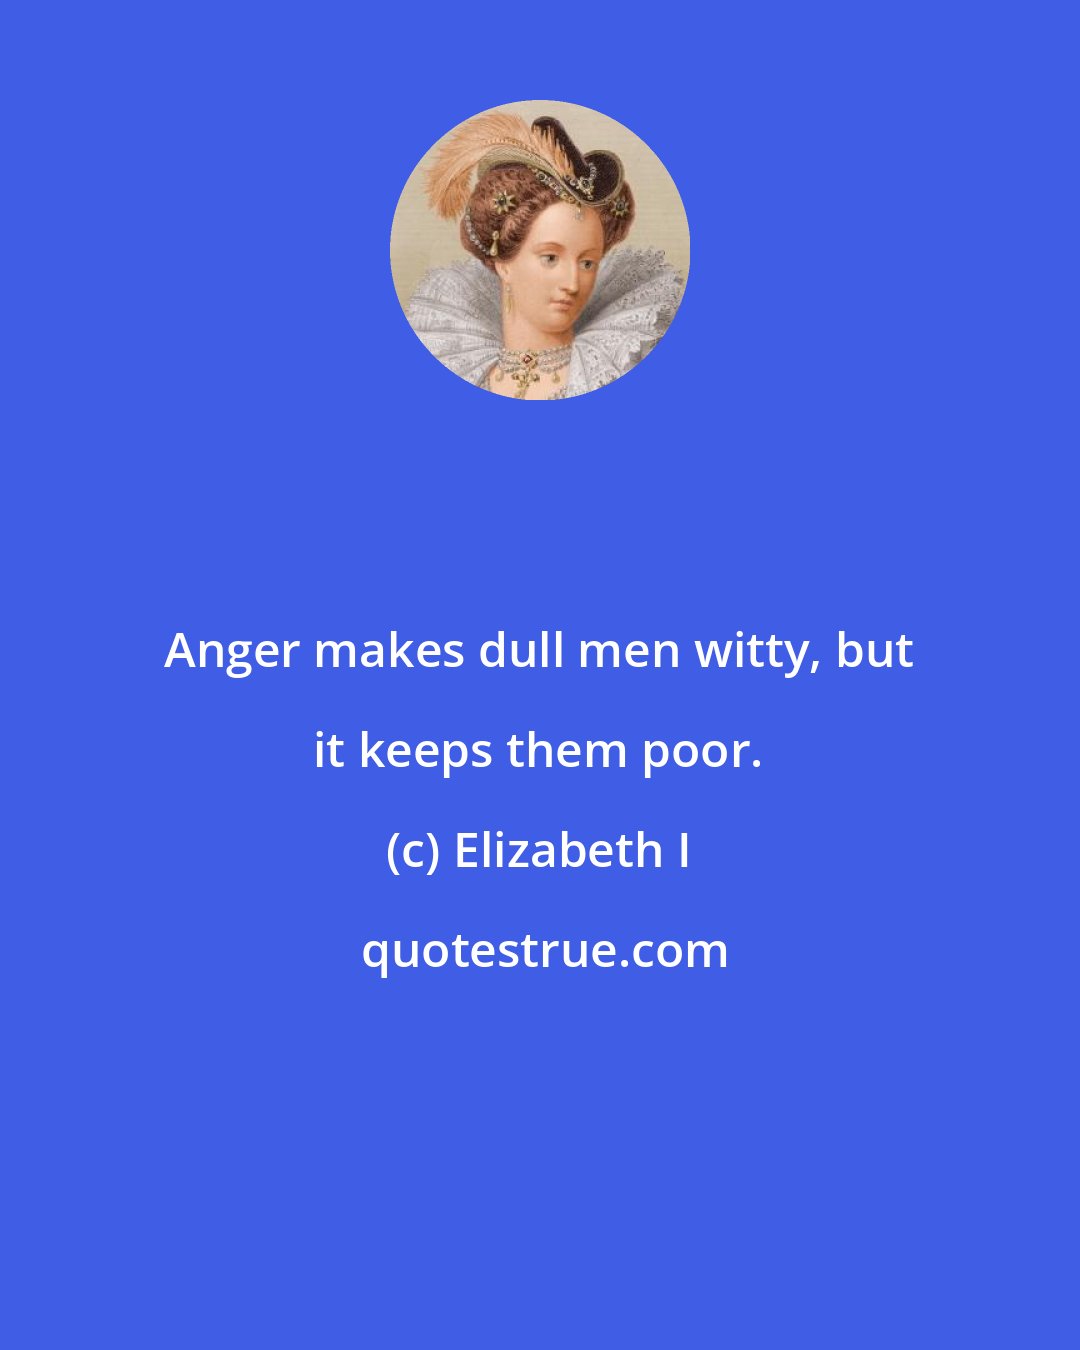 Elizabeth I: Anger makes dull men witty, but it keeps them poor.